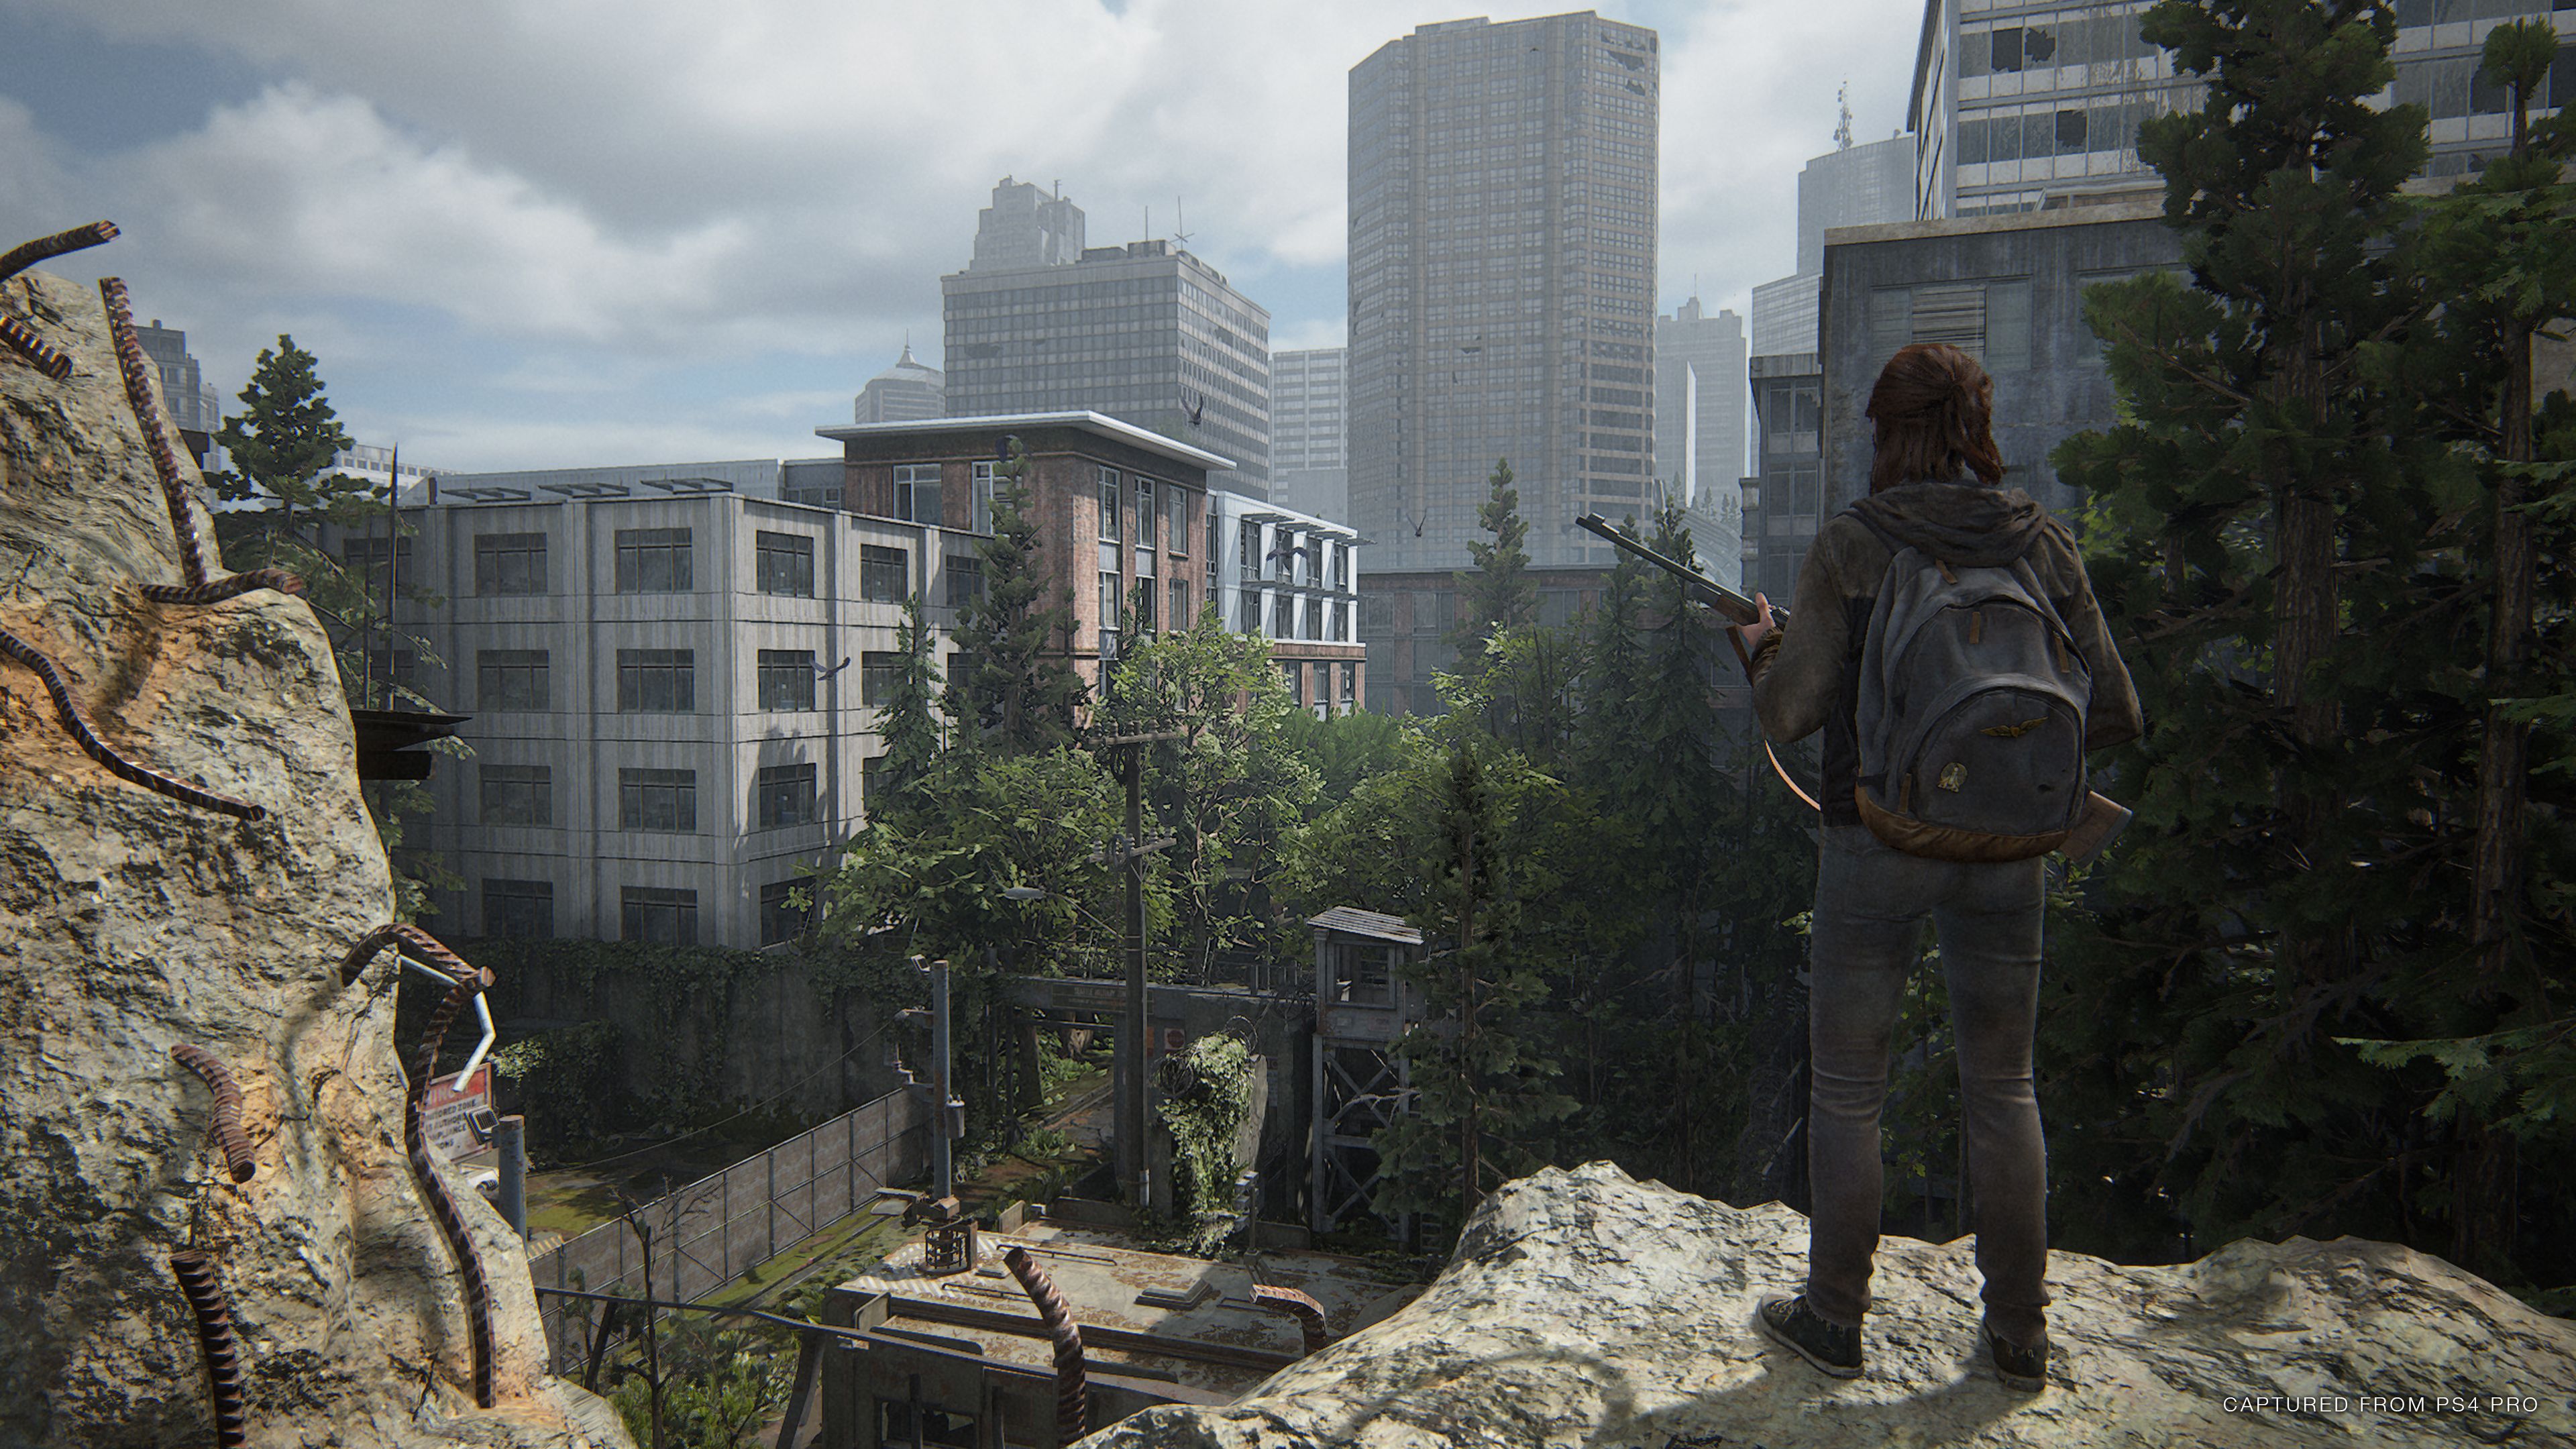 Topic · The last of us ·